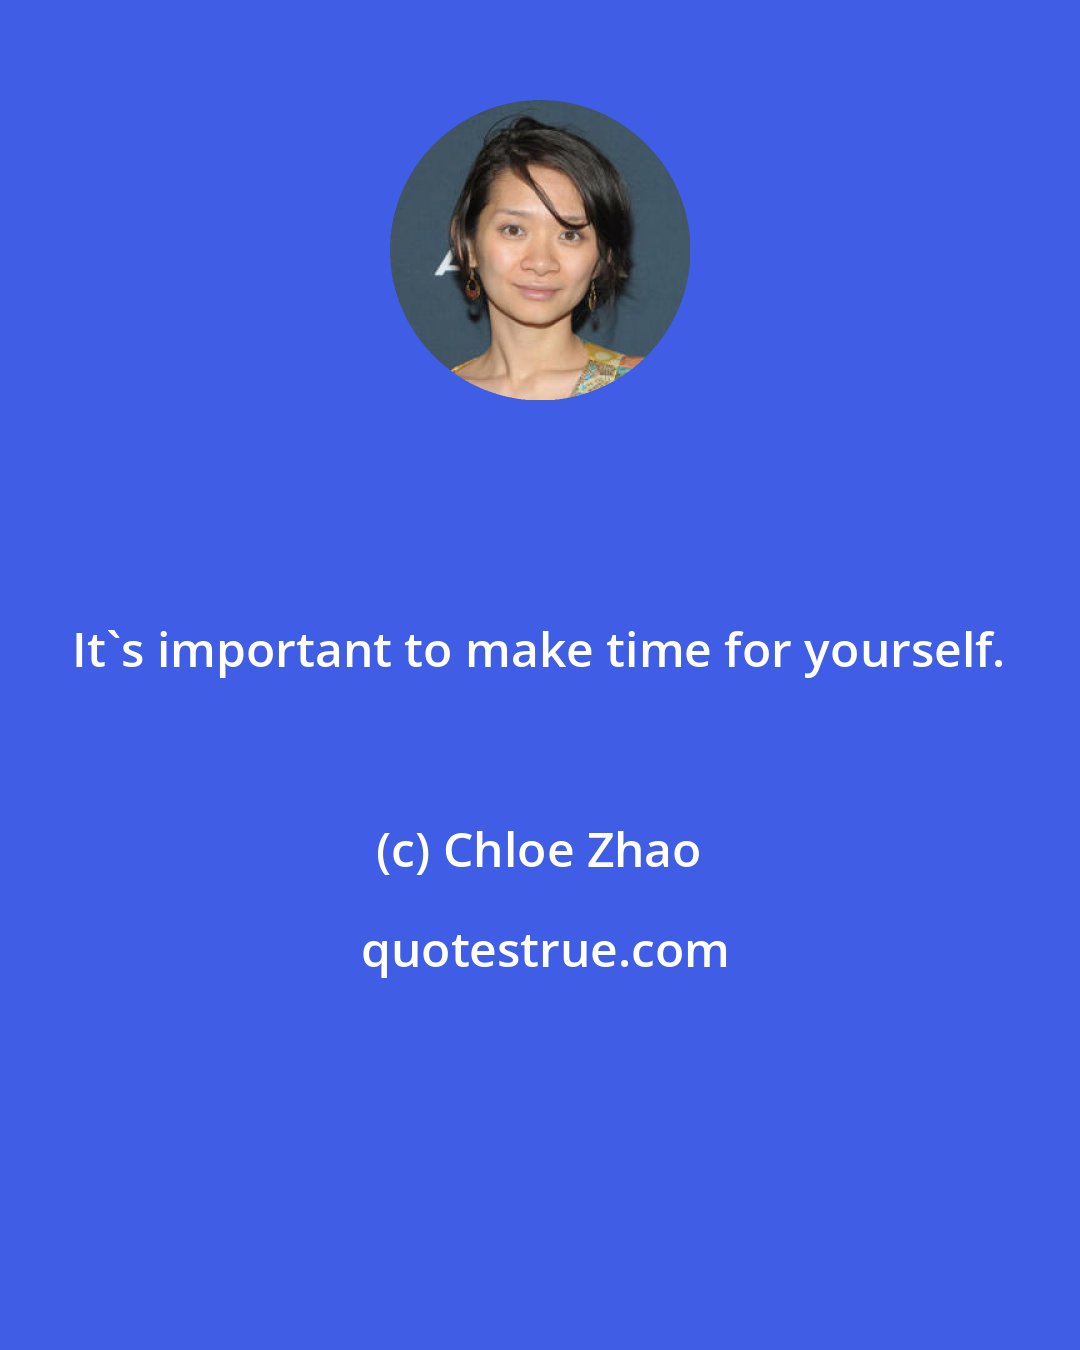 Chloe Zhao: It's important to make time for yourself.